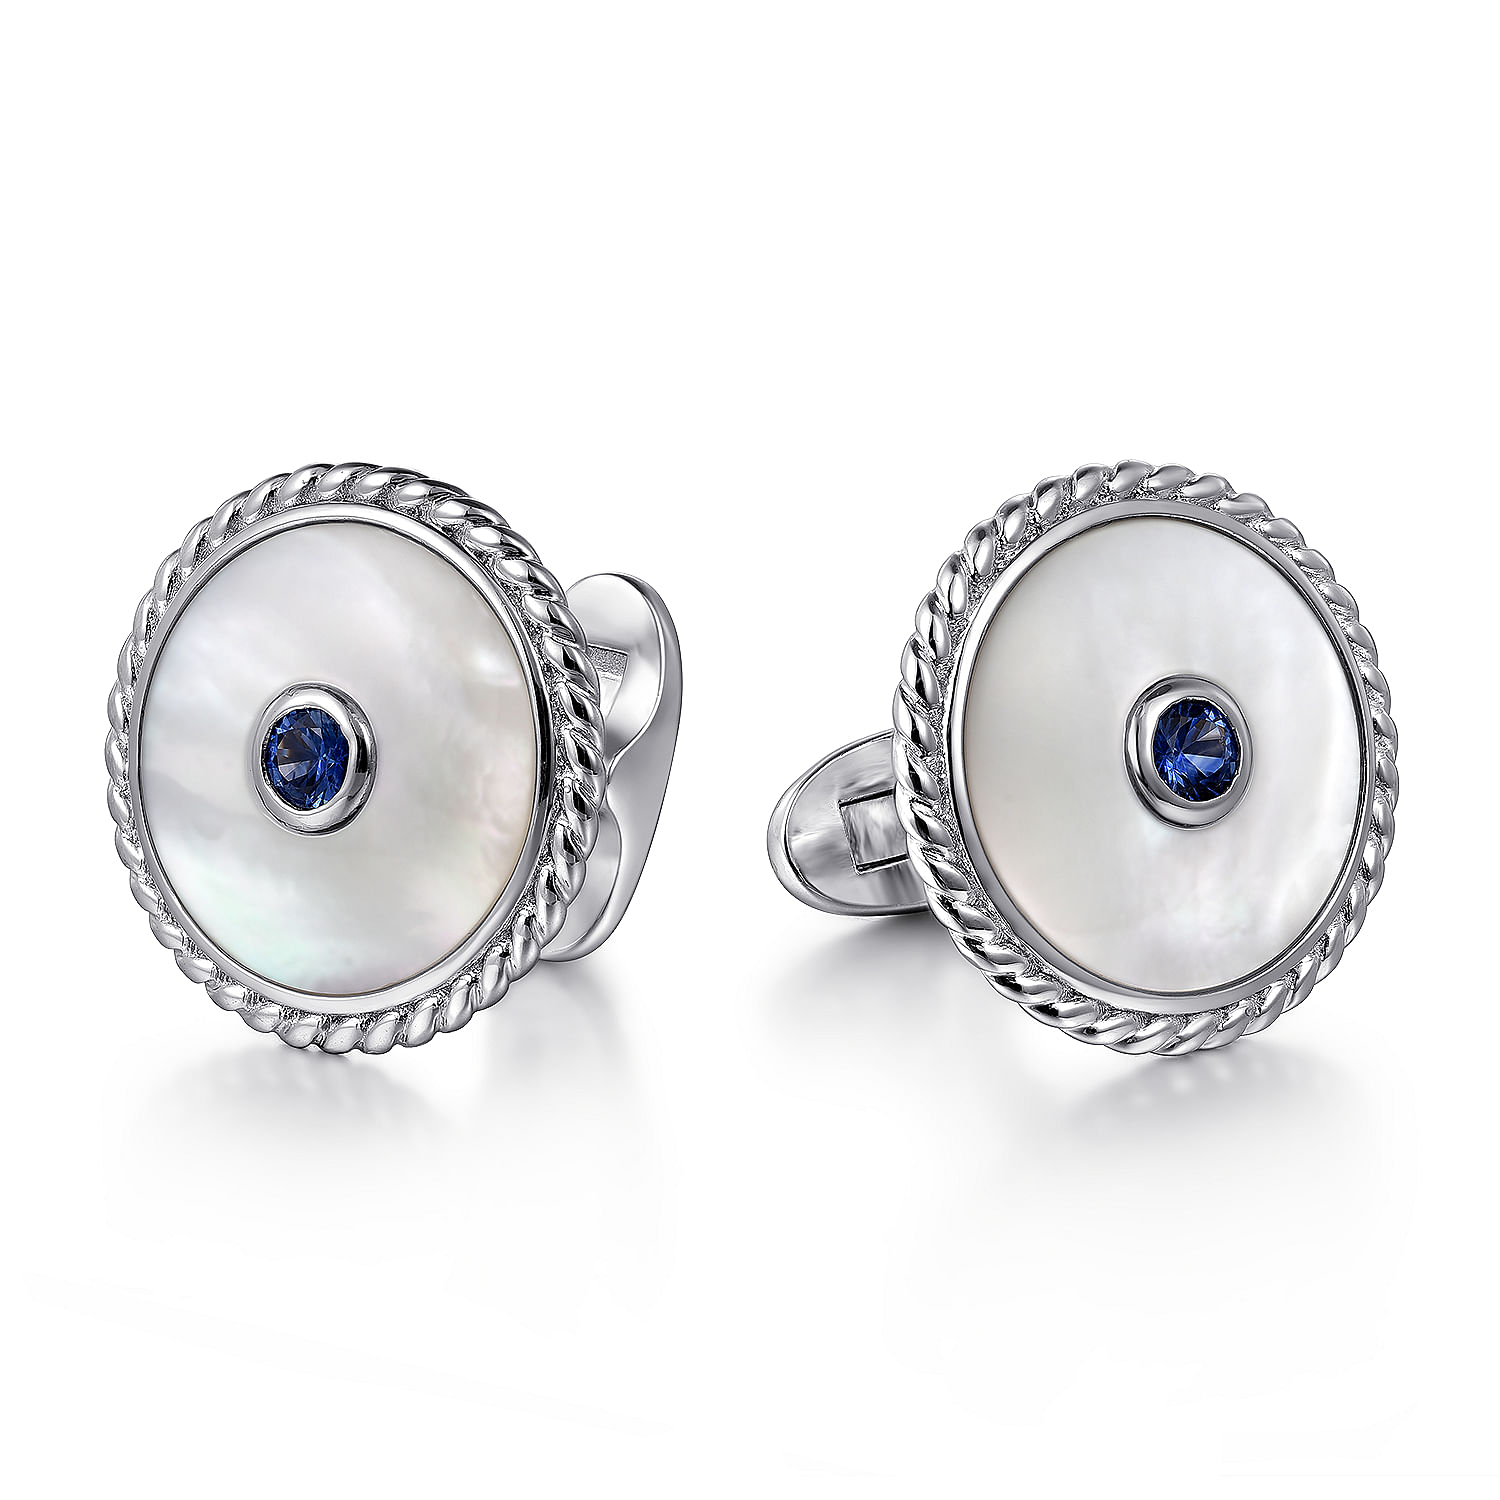 925 Sterling Silver Round Cufflinks with White Mother of Pearl and Sapphire